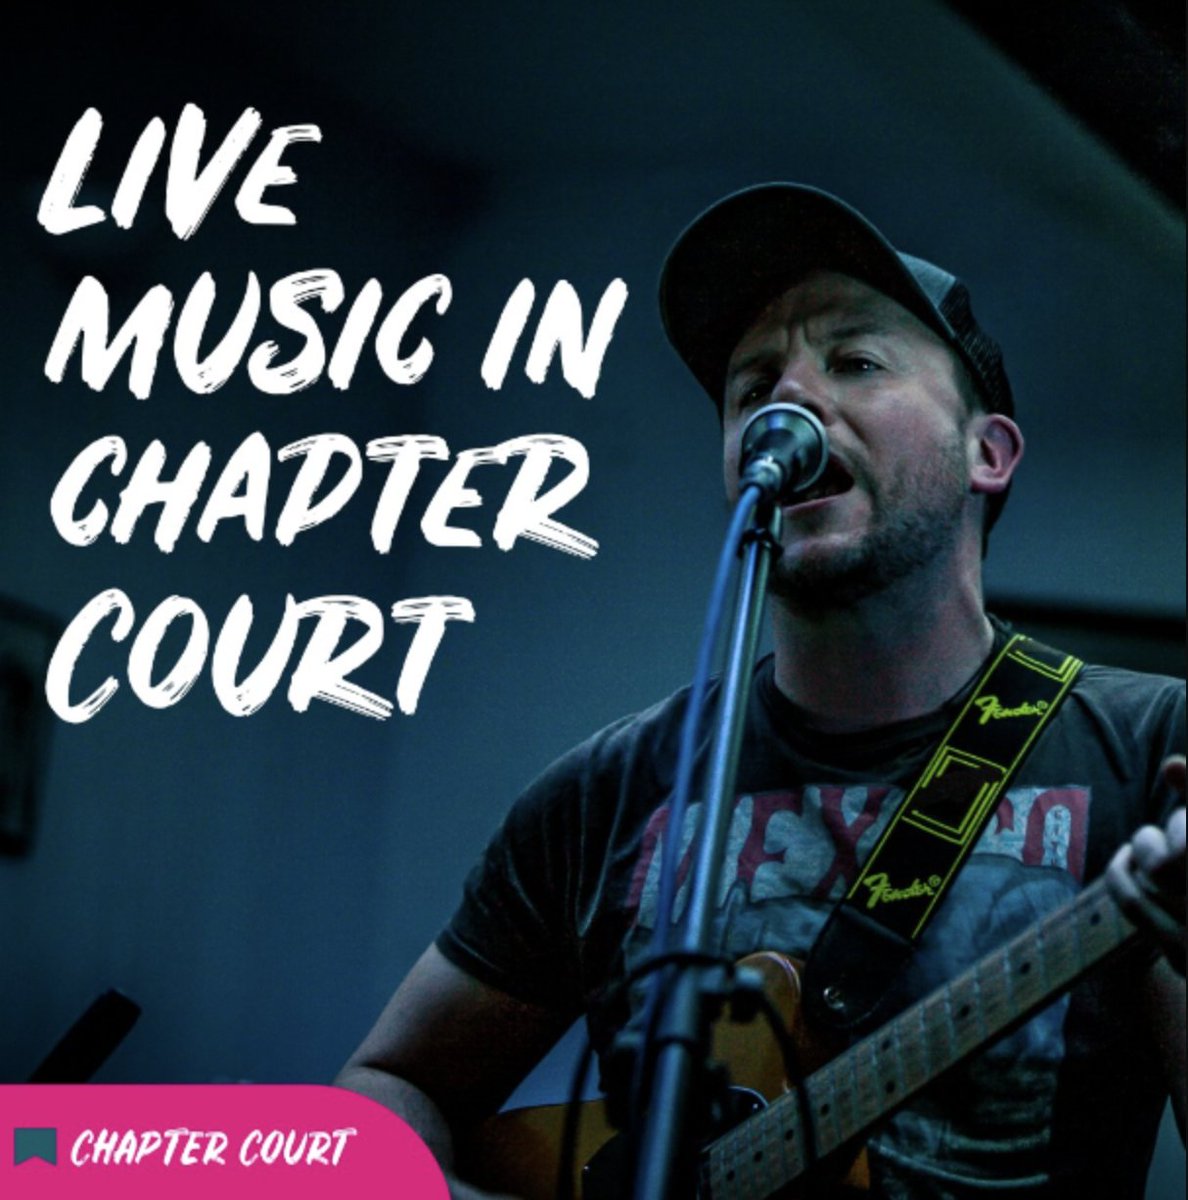 We are pleased to announce that we will have some fantastic acts playing in our new entertainment marquee starting tomorrow! Join us in our undercovered seating area, open until 11 p.m. Thursday through Saturday! #wrexham #chapterCourt #RoughHands #LiveMusic #Wrecsam